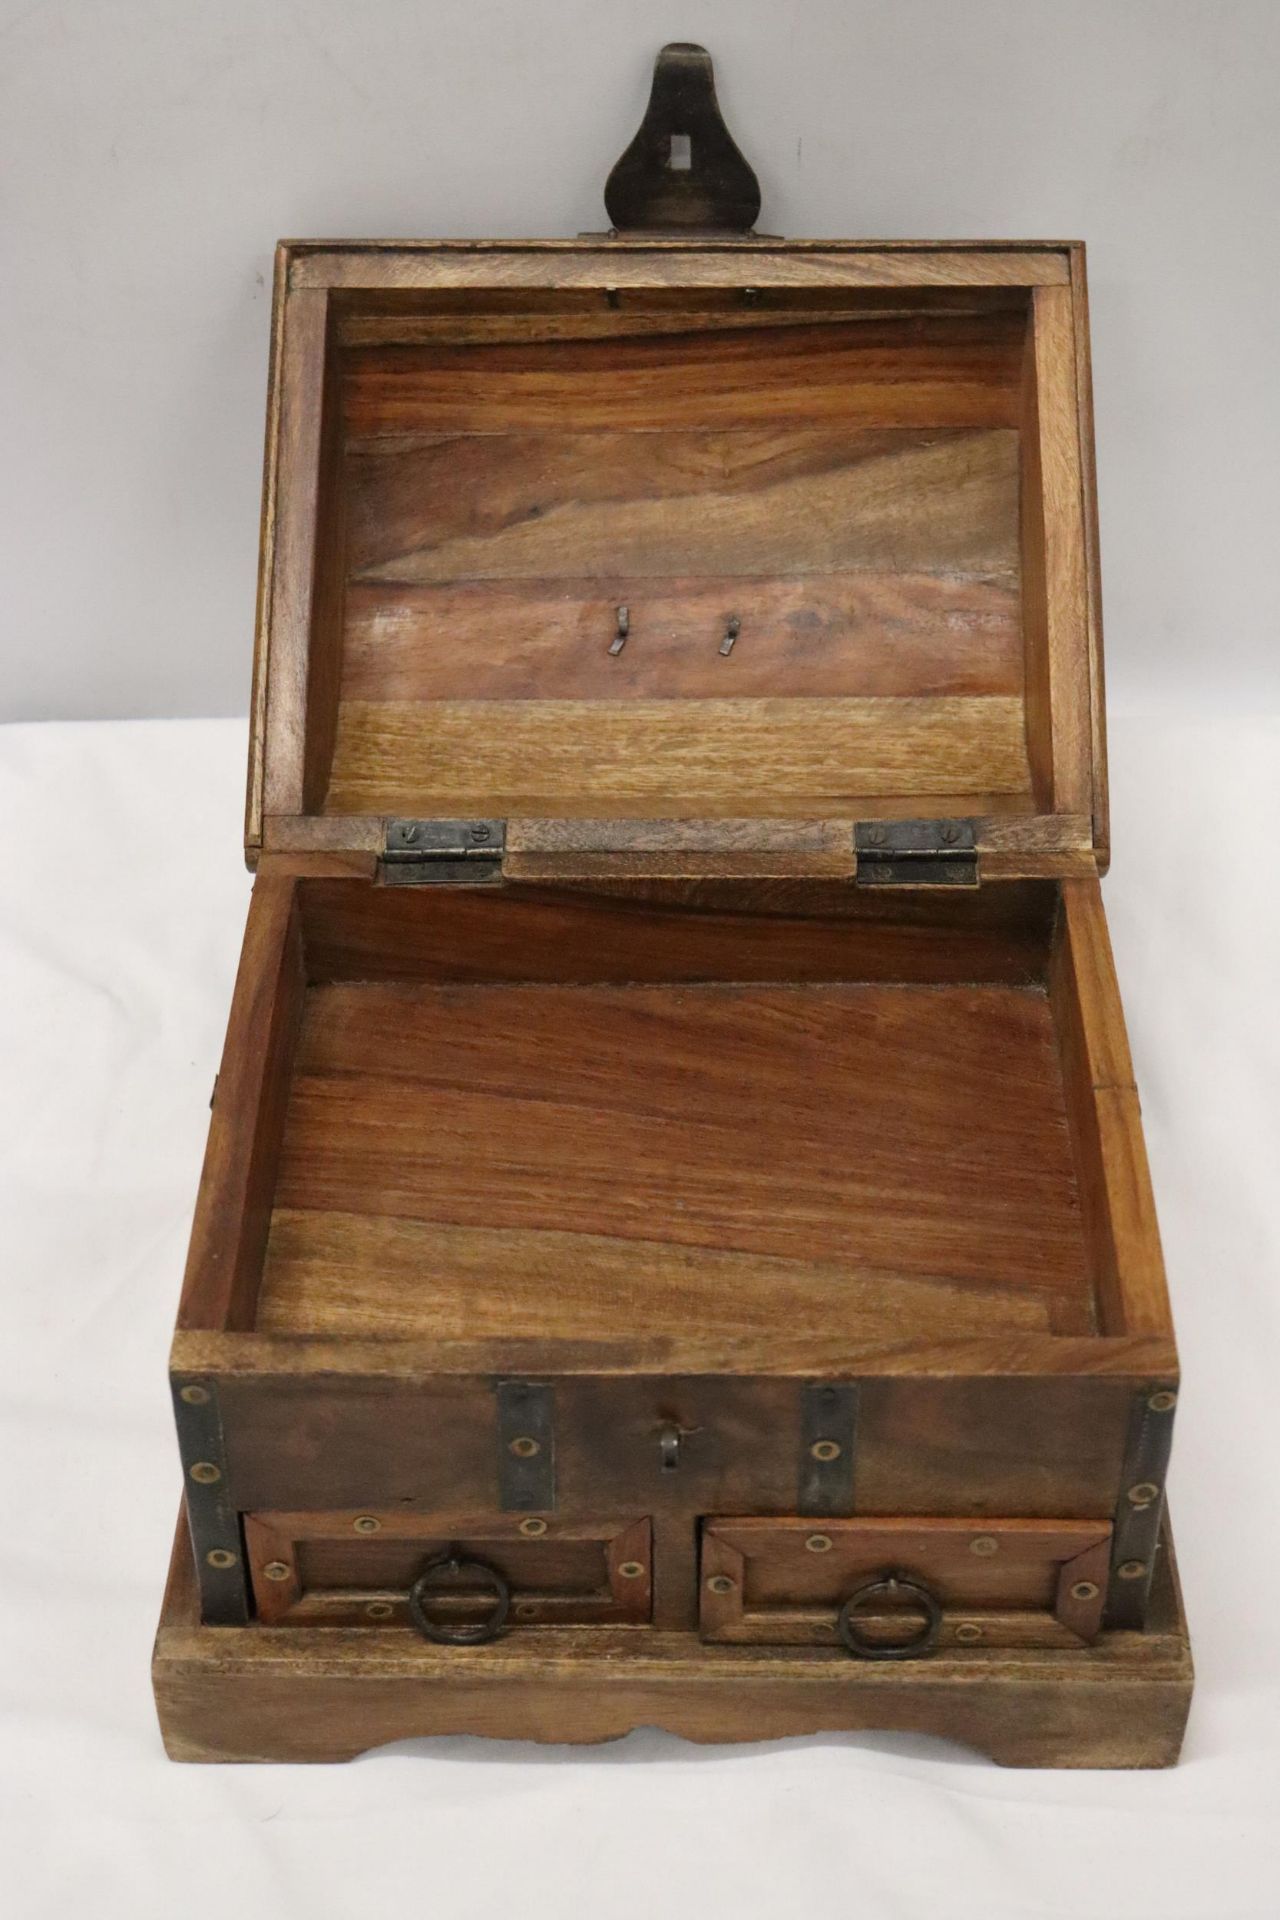 A VINTAGE SMALL DOMED WOODEN CHEST WITH METAL BANDING AND TWO DRAWERS, HEIGHT 21CM, LENGTH 26CM, - Image 3 of 6